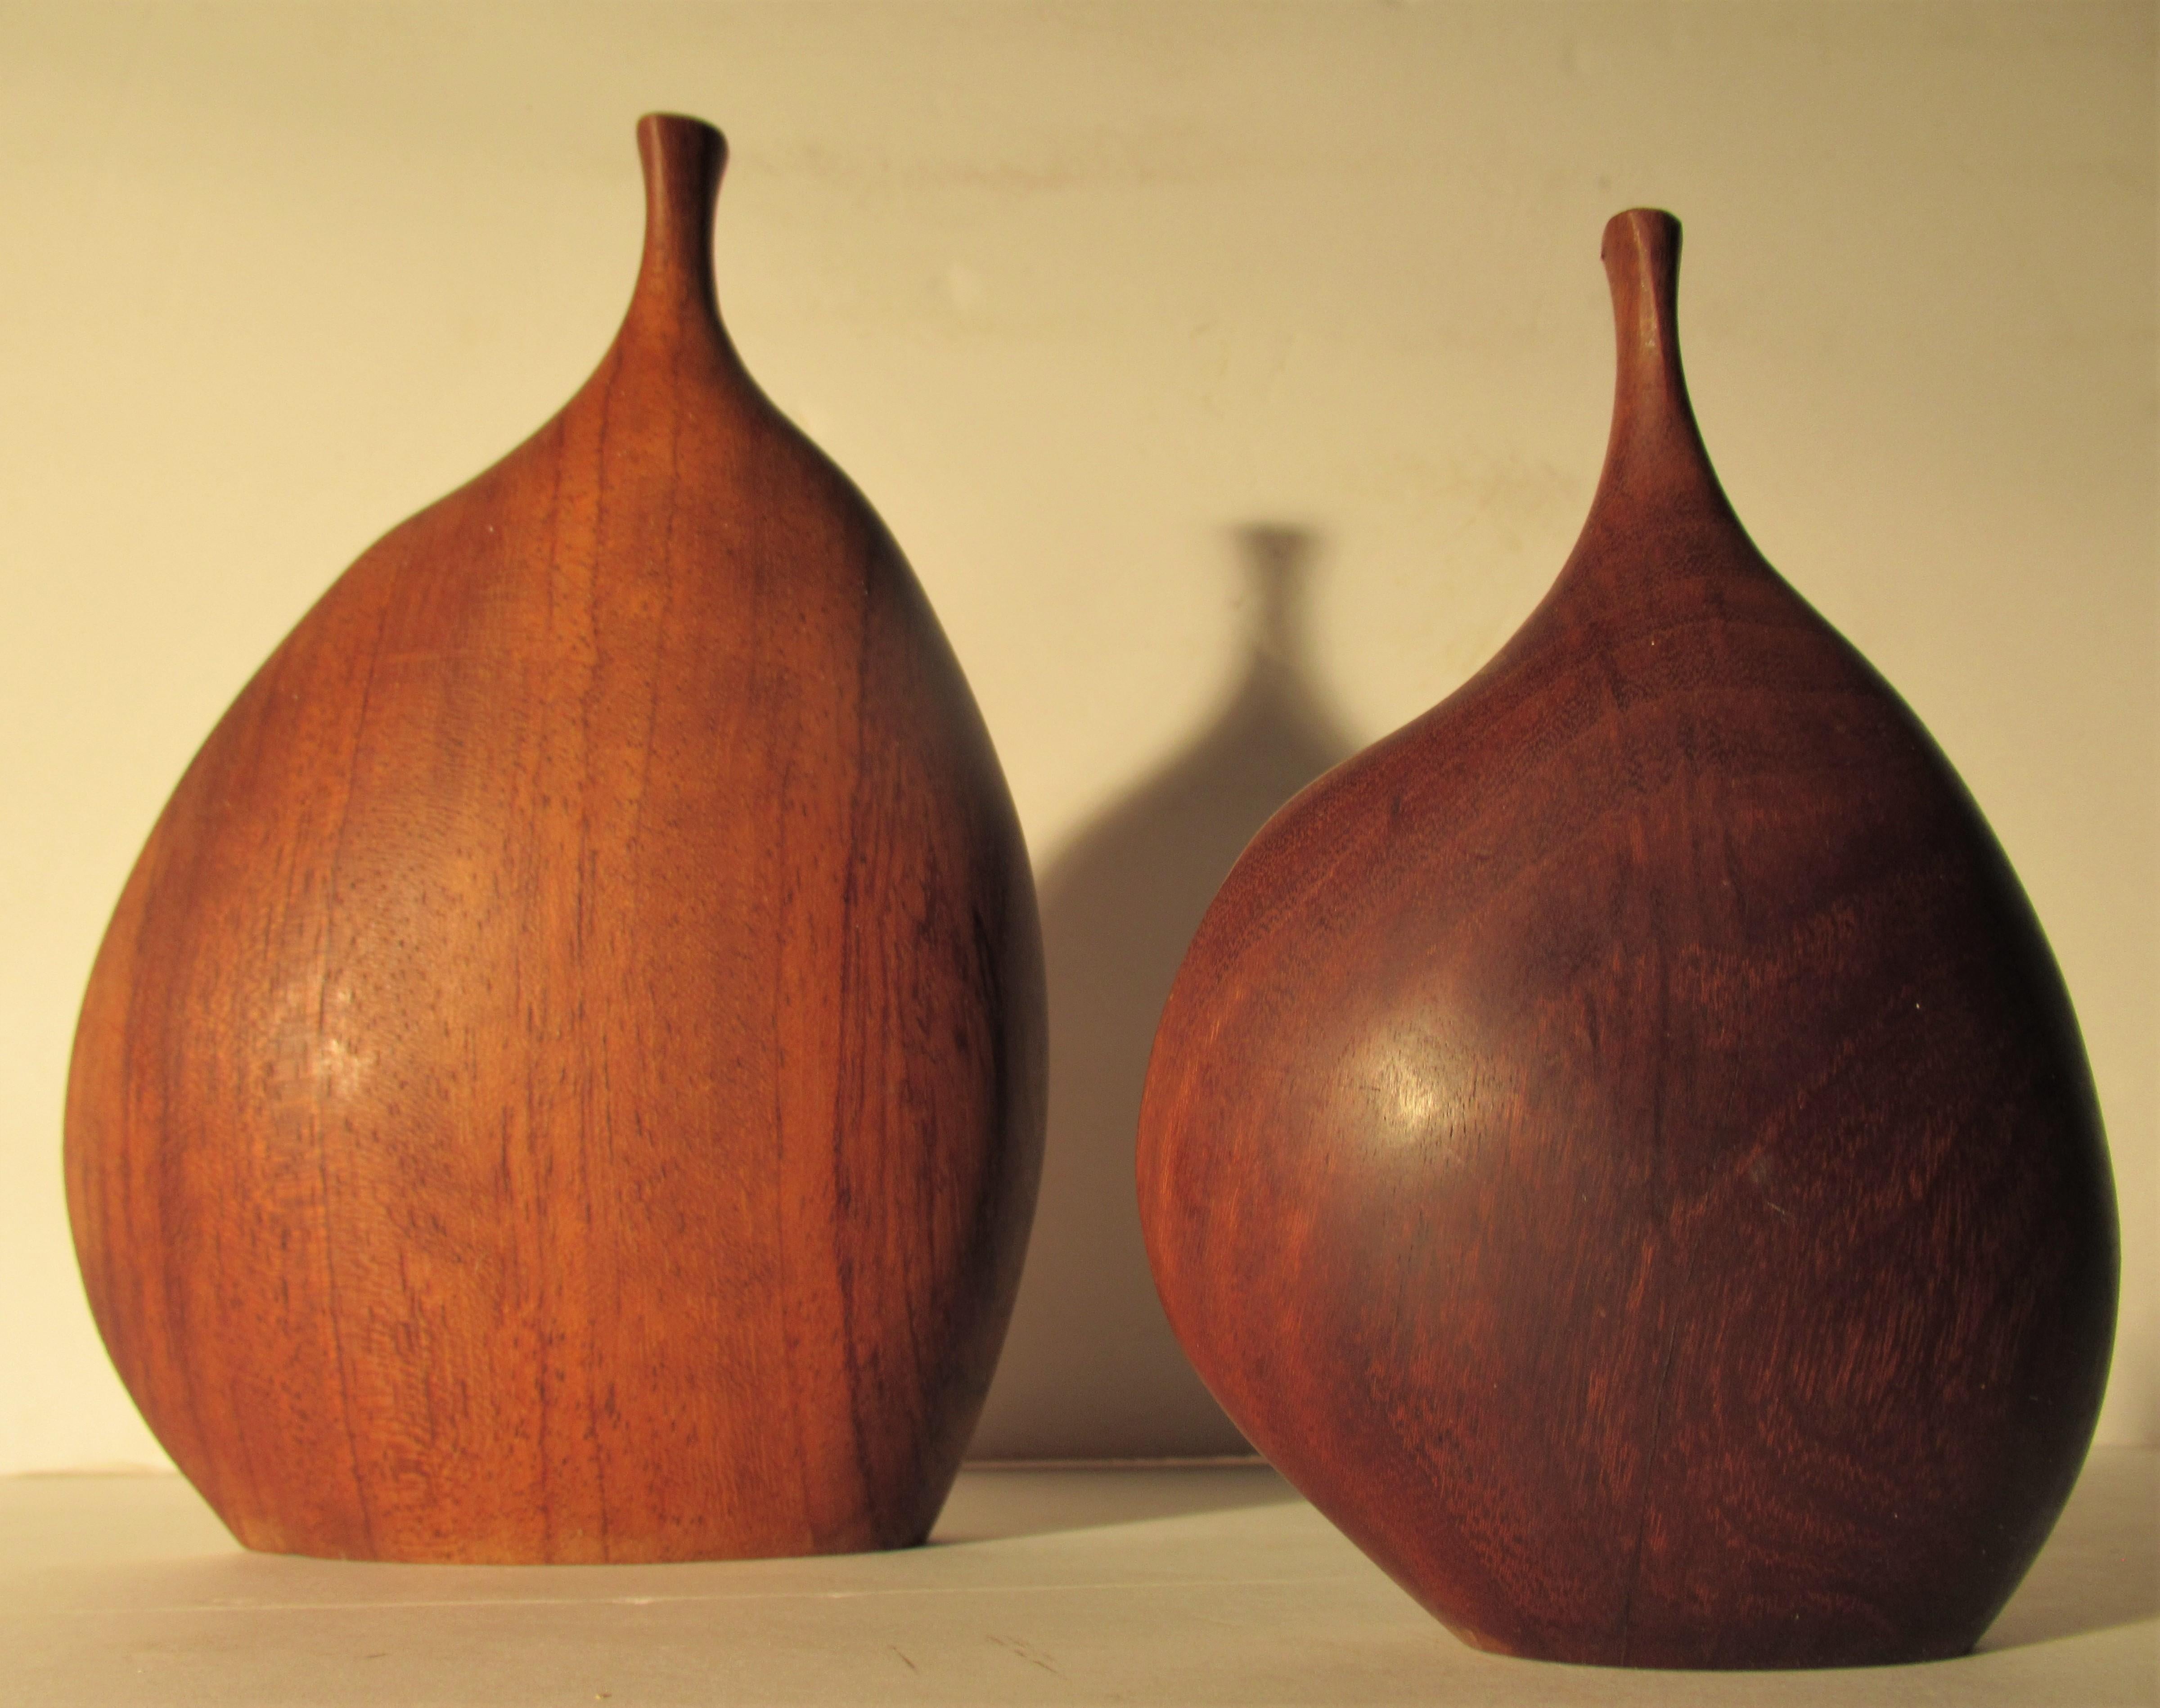 Very fine organic modern biomorphic form carved wood sculpture bud vases / weed pots. The larger is signed D. Ayers / African Bubinga /  7-75. The smaller is not signed but both seem to be by the same hand. The larger vase measures 7